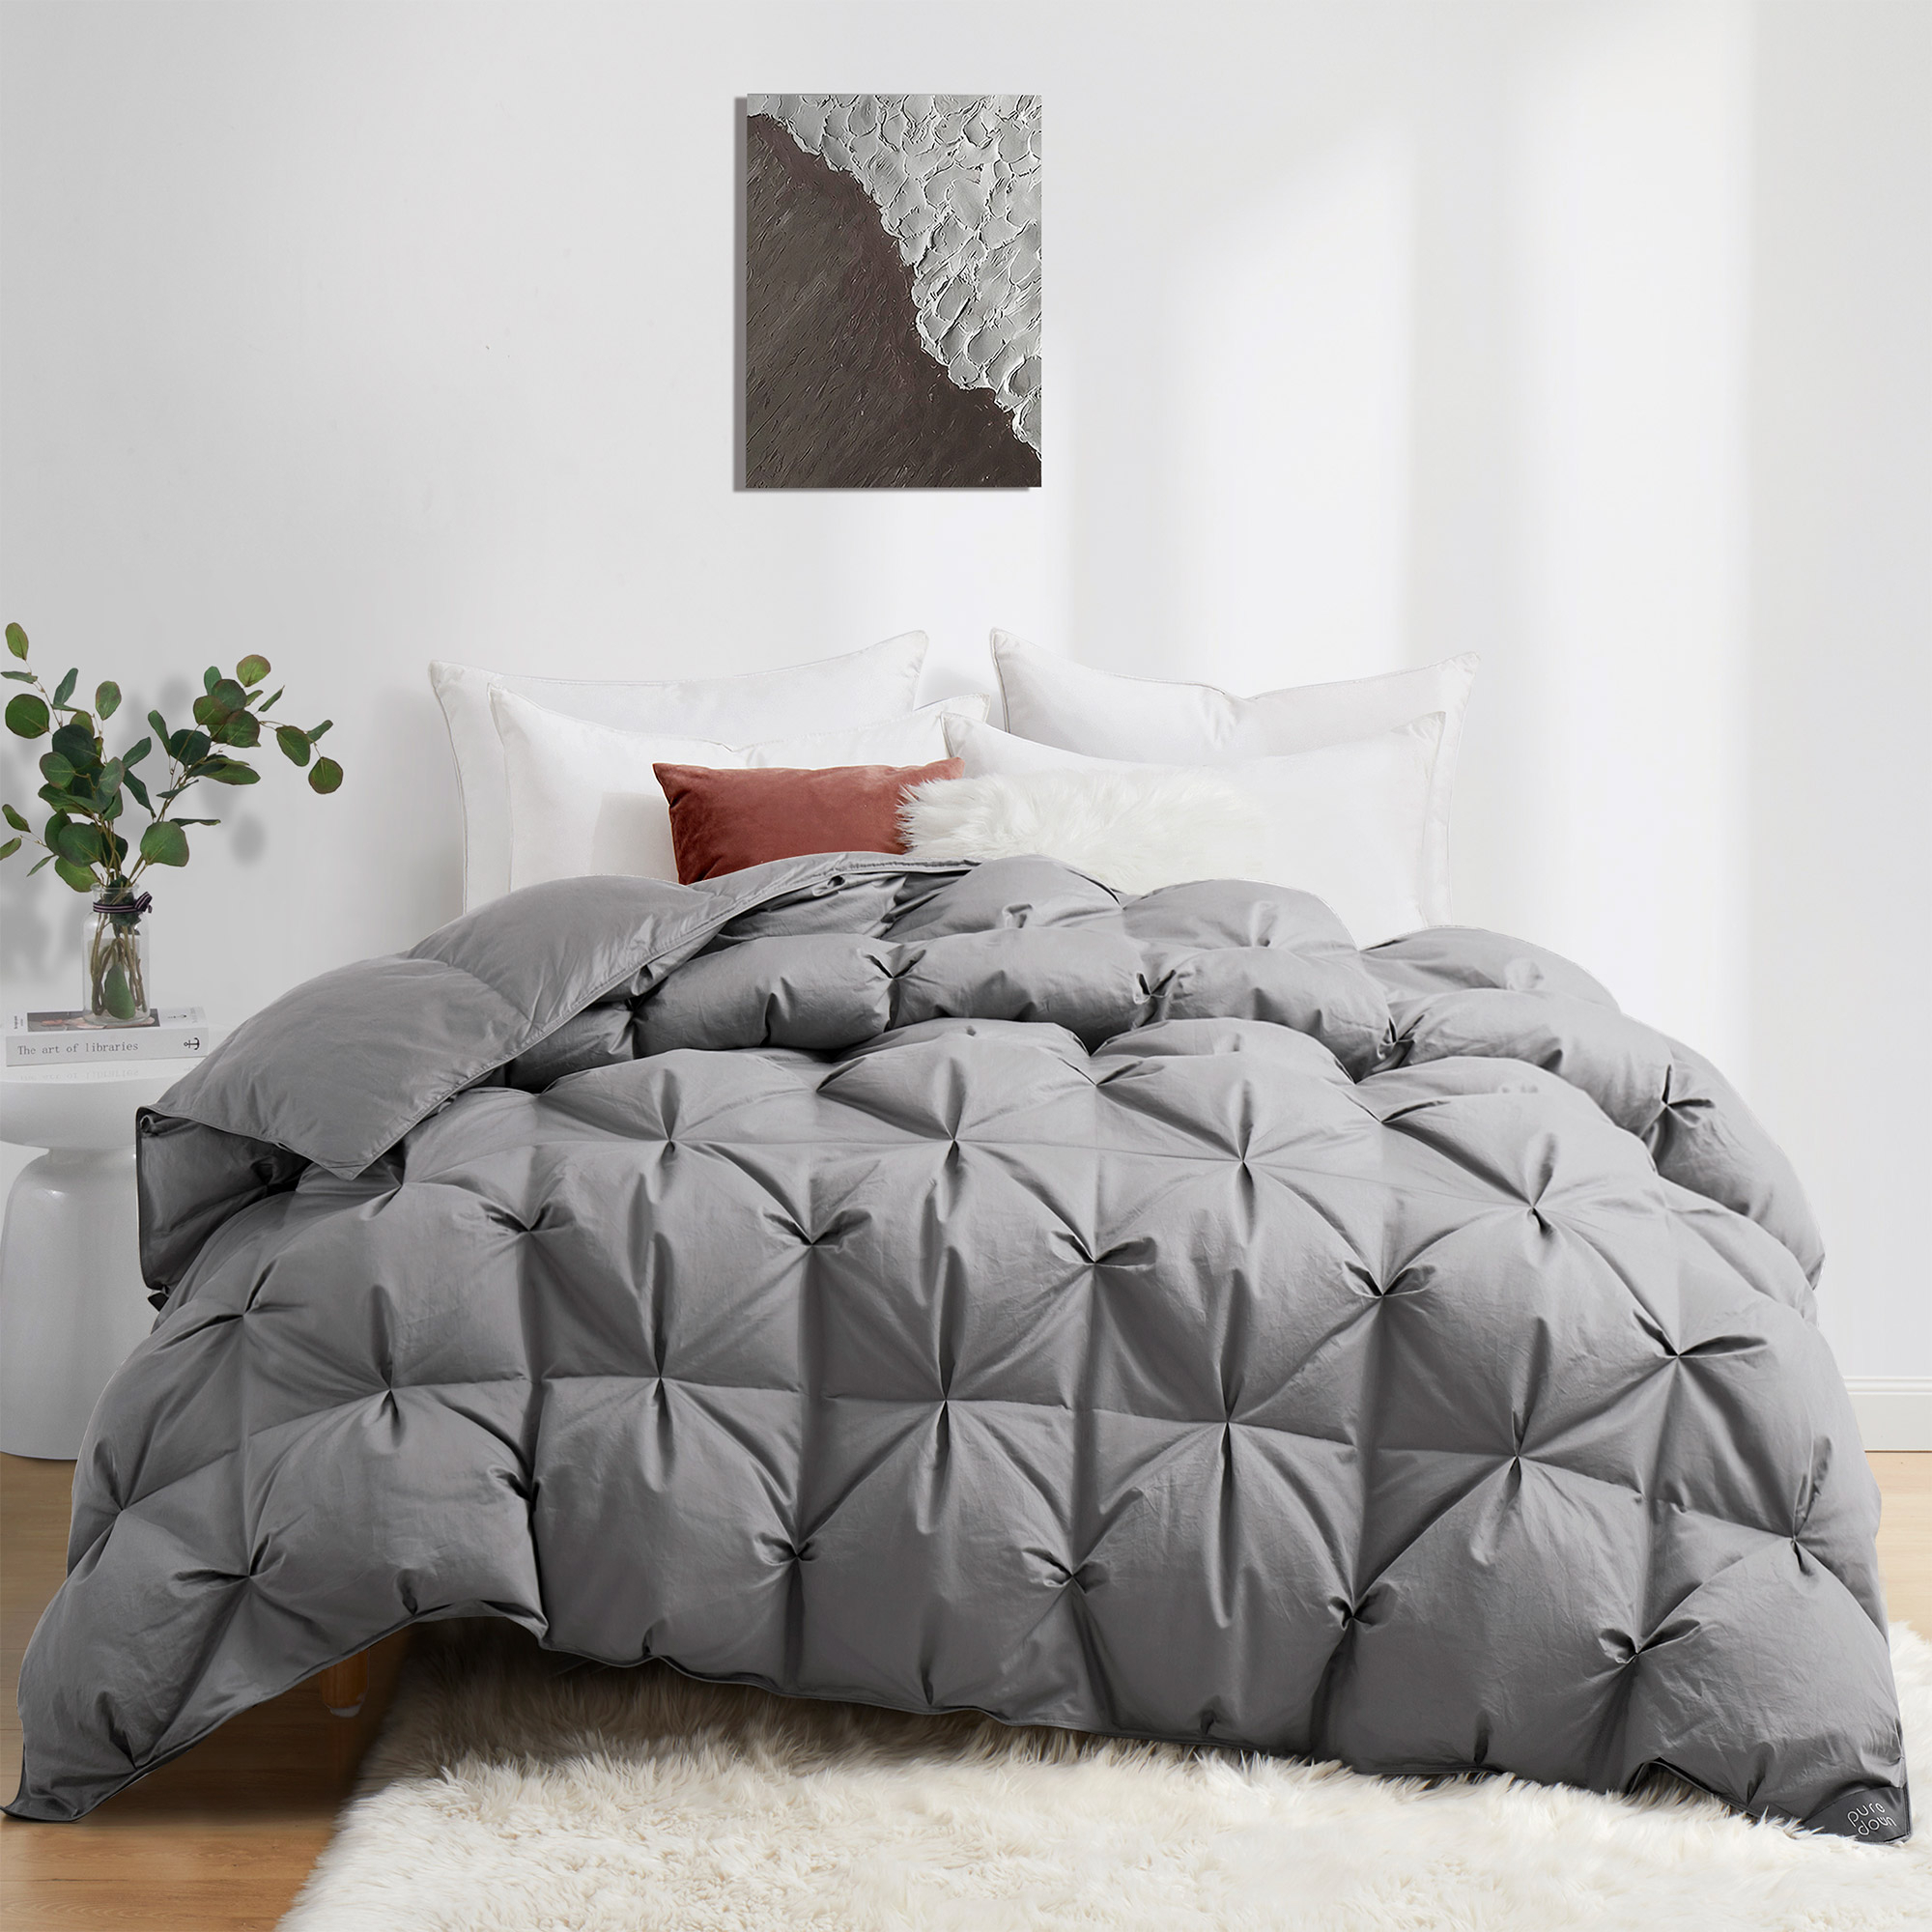 Luxury 800 Fill Power White Goose Down Winter Comforter-Extra Warm Super Soft Heavy Weight Comforter - Grey, Full